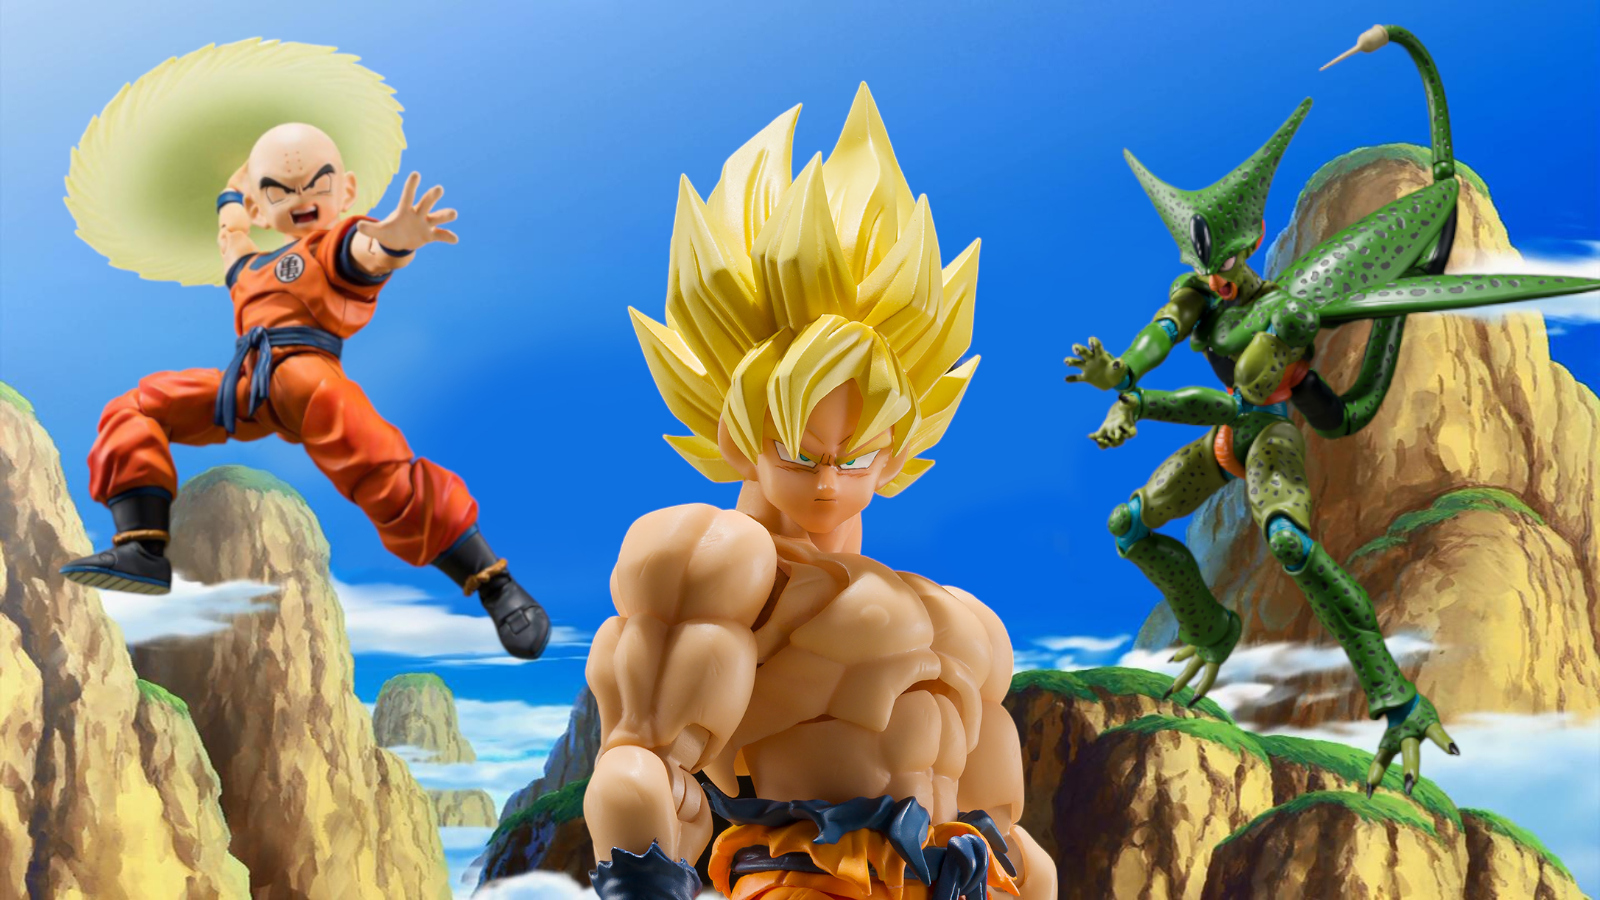 Are Goku's fighting stances real Kung-Fu stances or just made up? - Quora